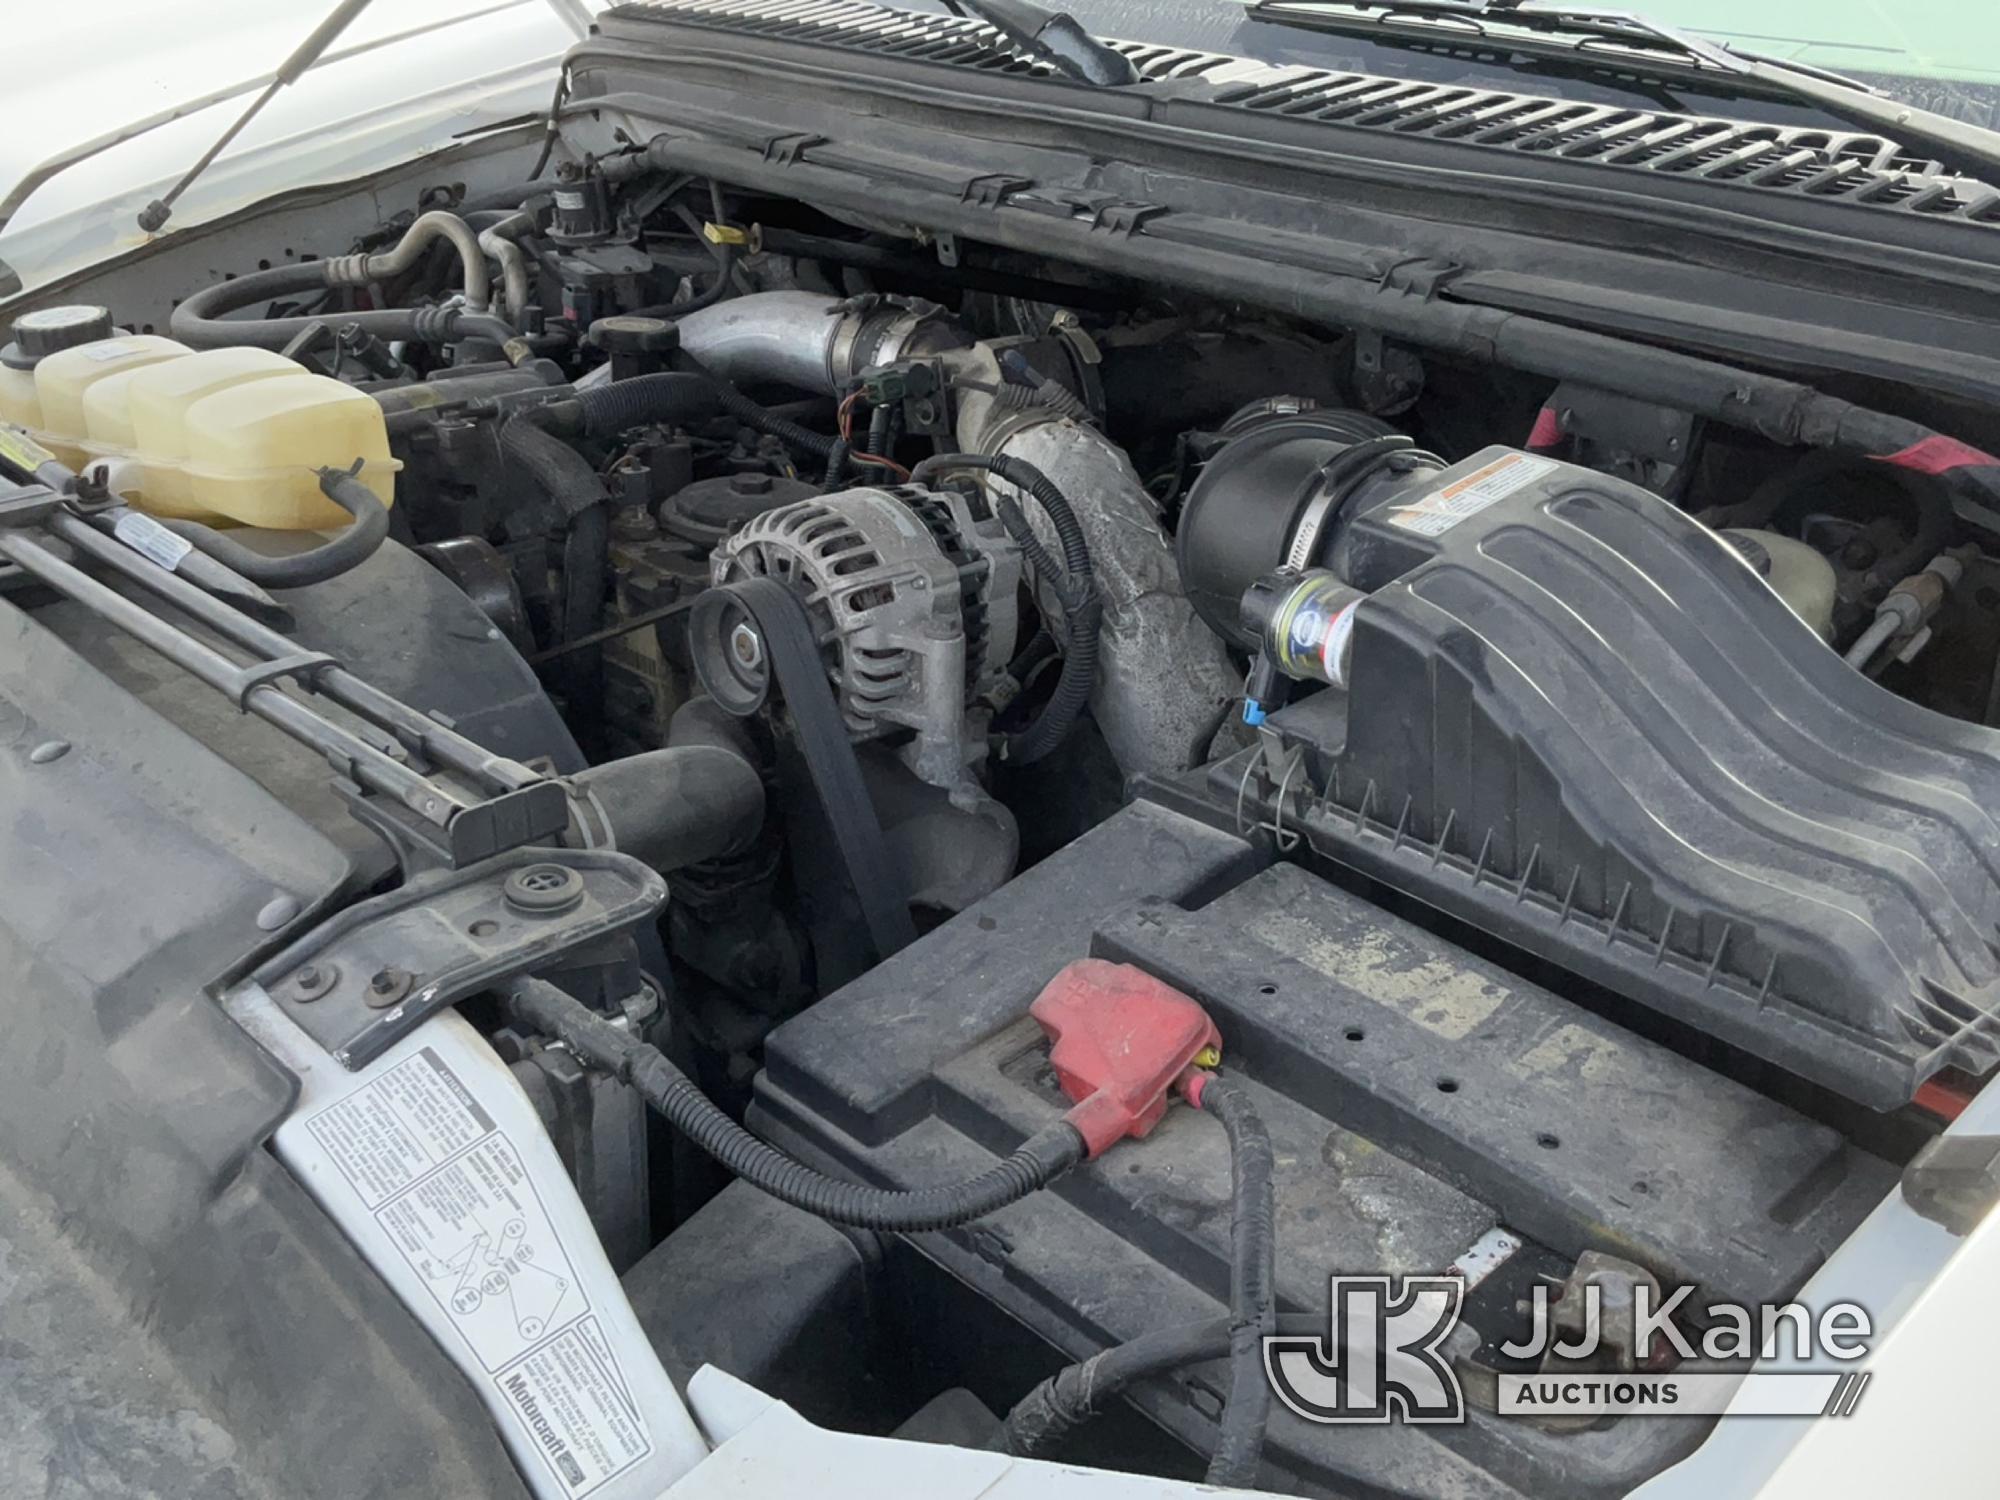 (Salt Lake City, UT) 2003 Ford F250 4x4 Pickup Truck Not Running, Condition Unknown